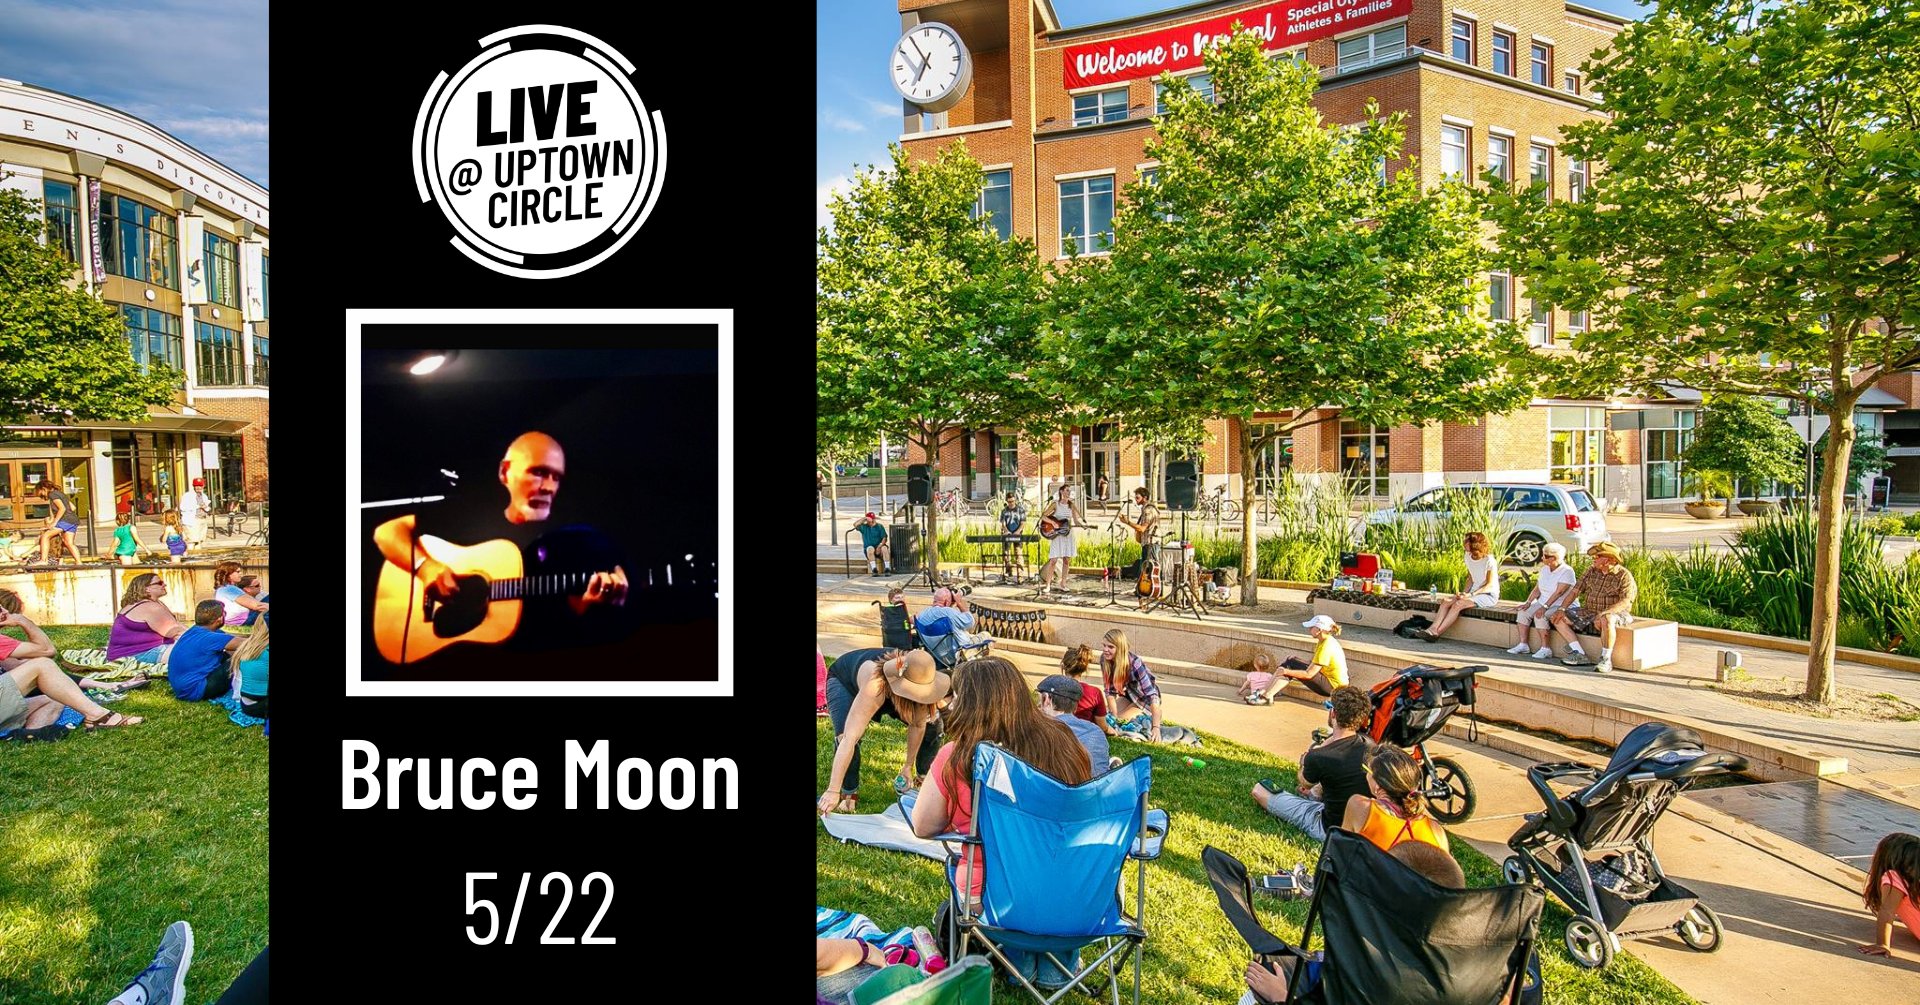 Normal LIVE presents Bruce Moon @ Uptown Circle